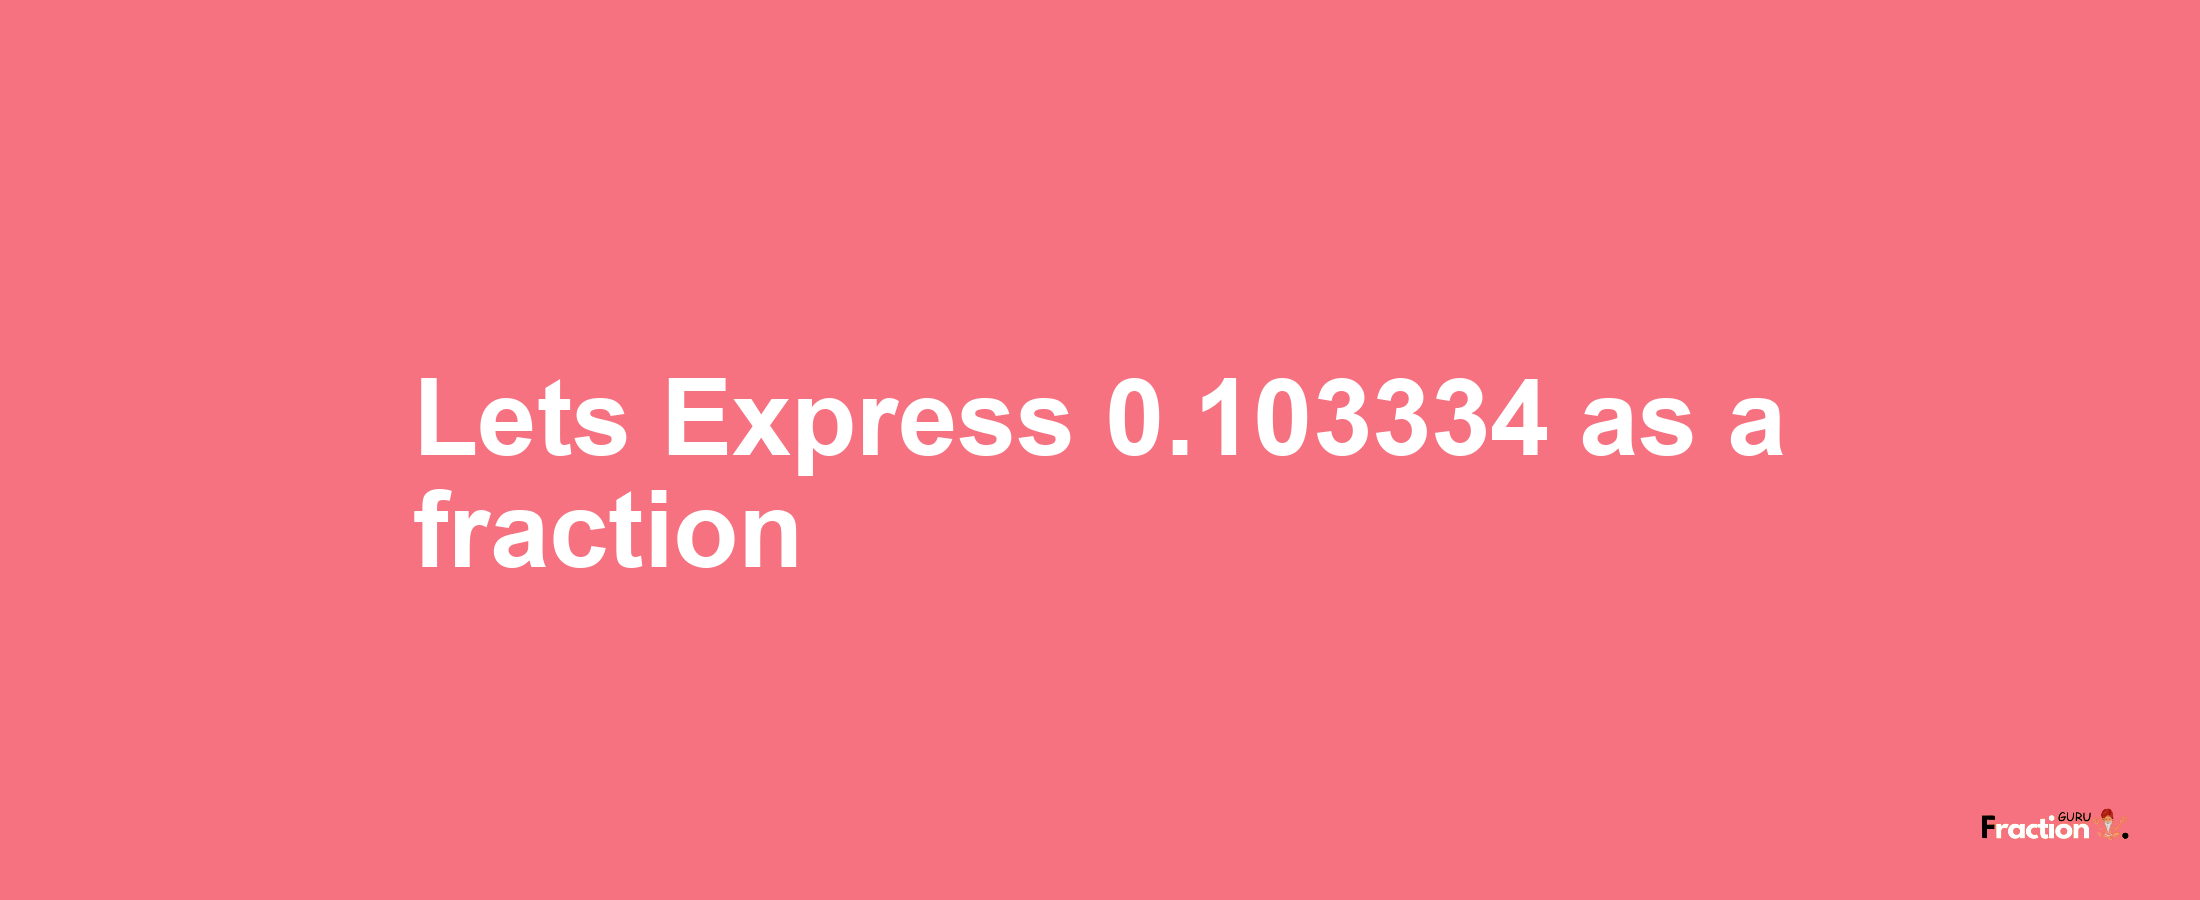 Lets Express 0.103334 as afraction